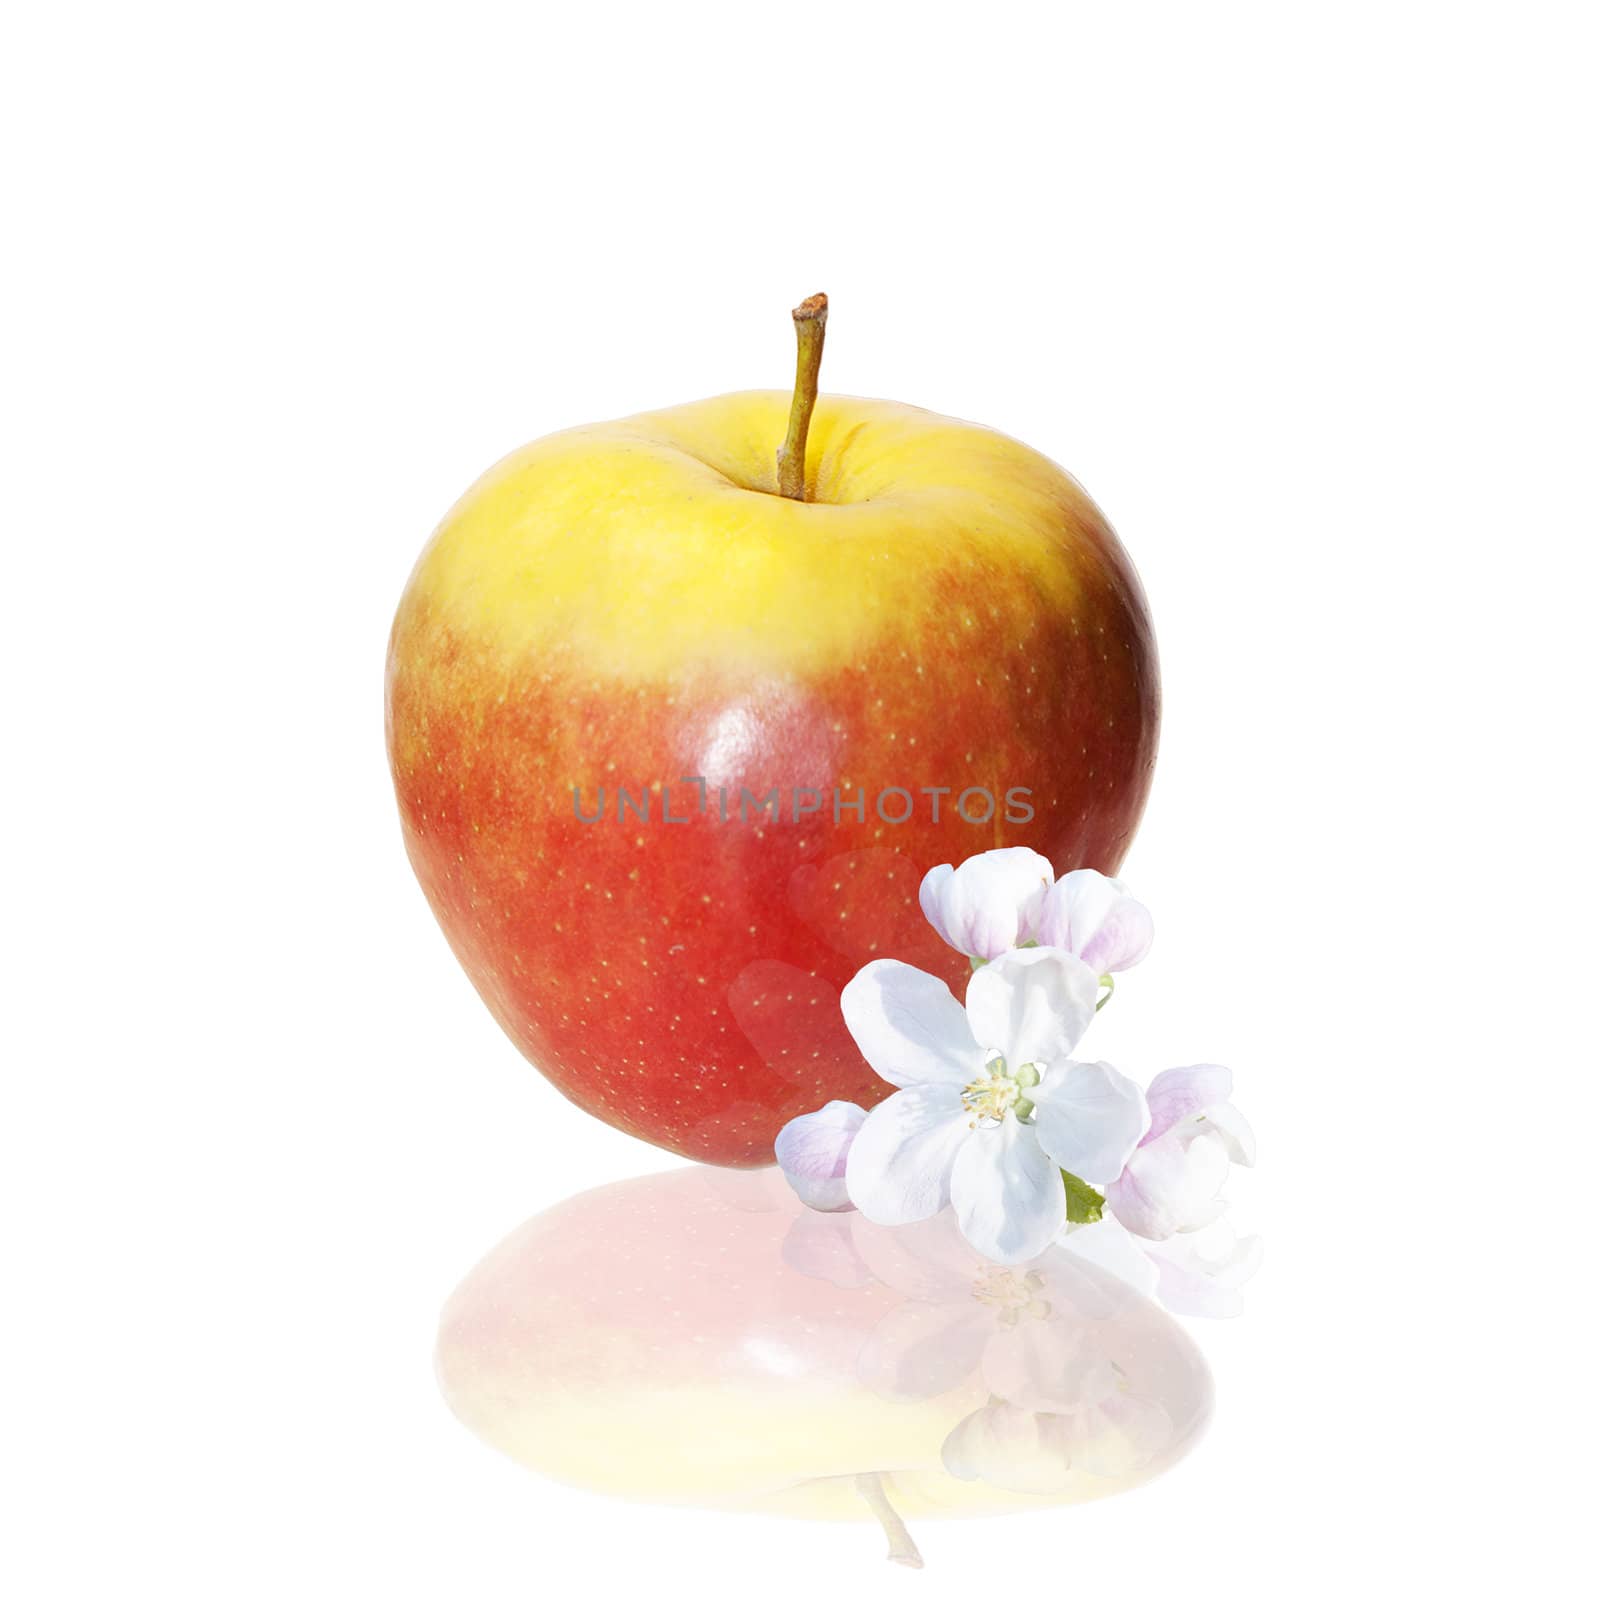 The red apple and flowers over white background